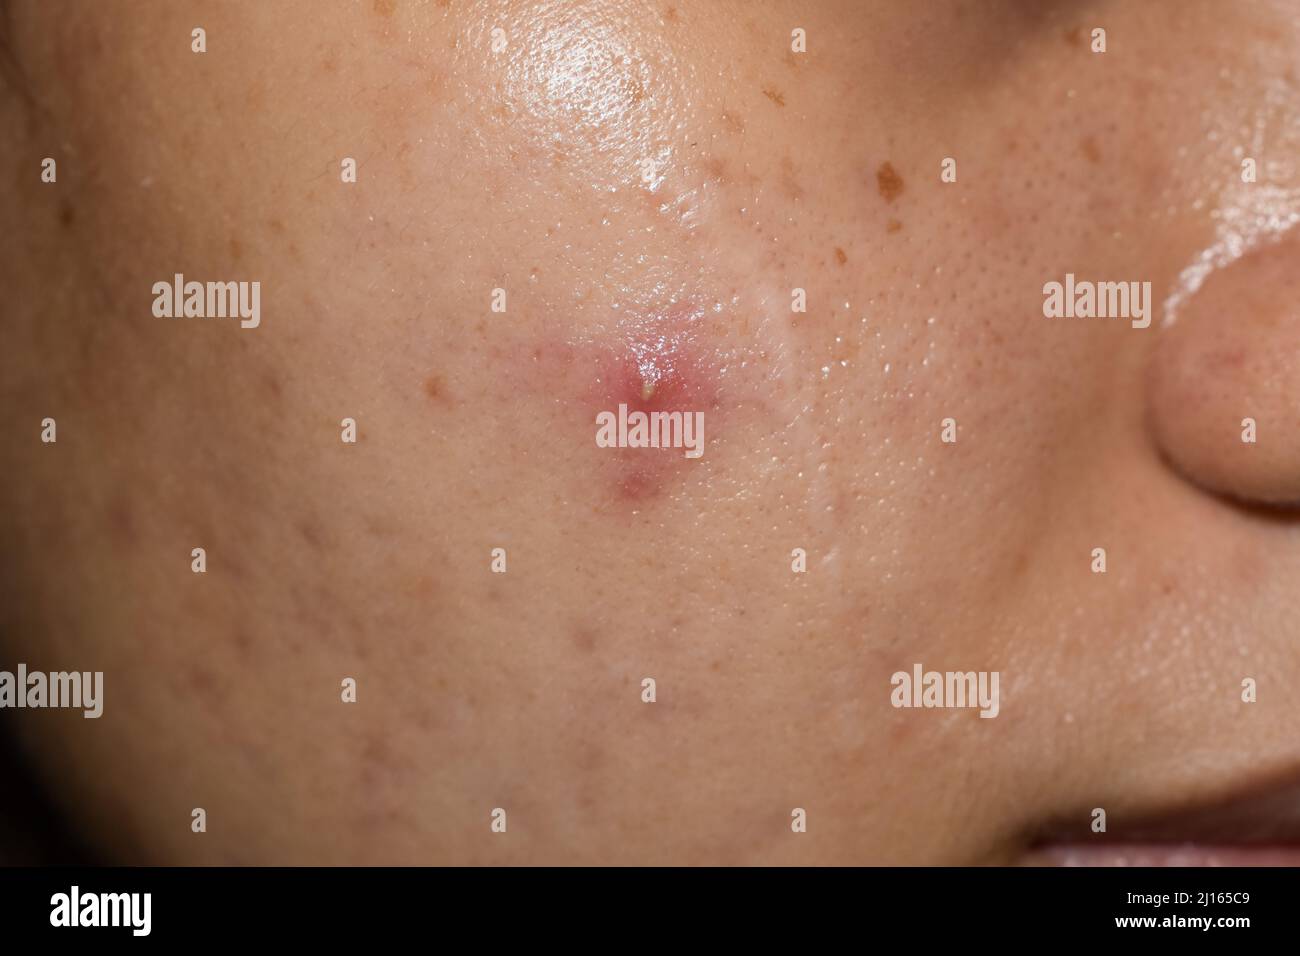 Single cystic acne vulgaris on oily face of Southeast Asian young woman. Stock Photo